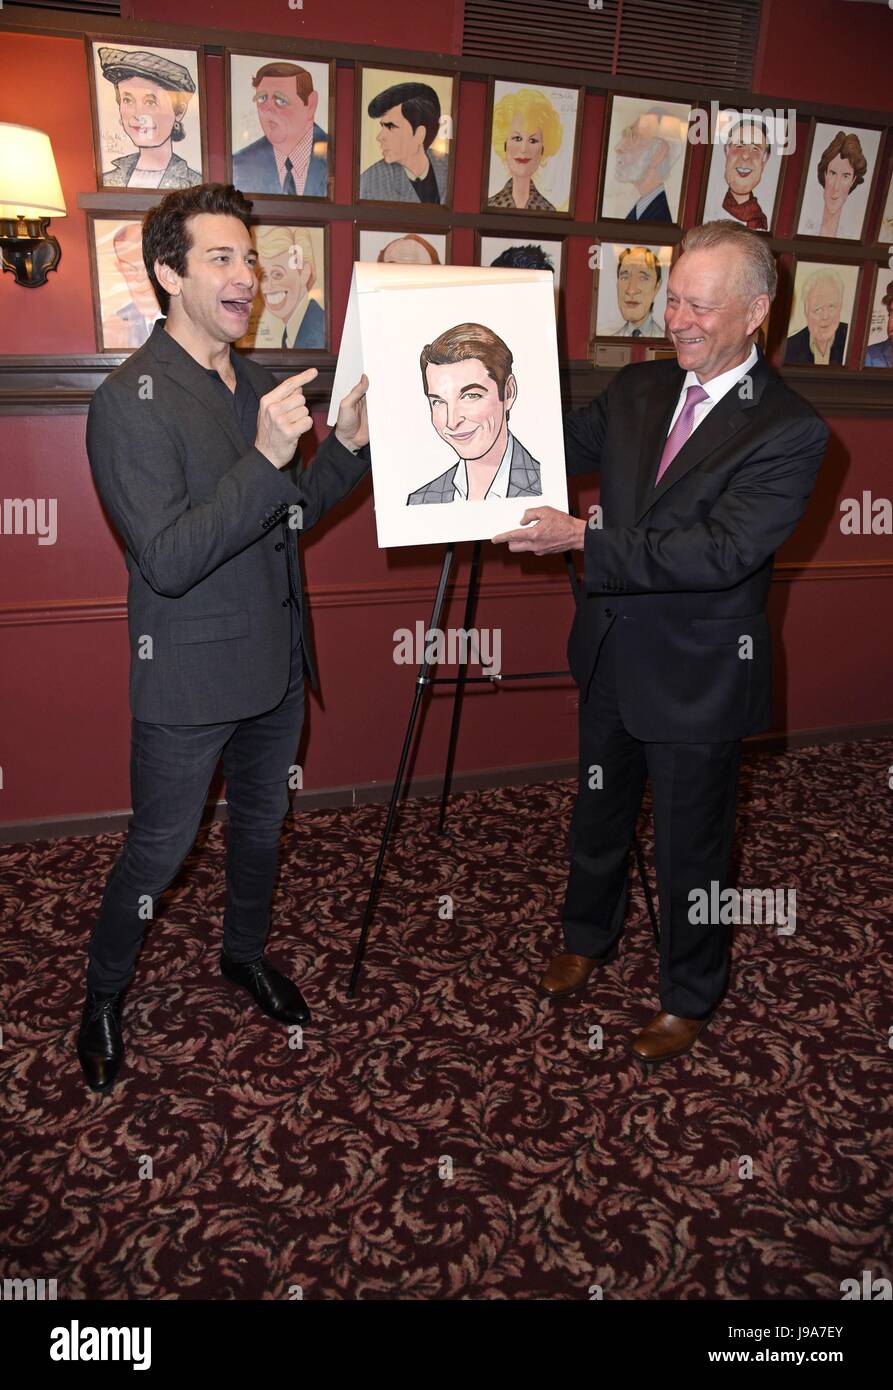 New York, NY, USA. 31st May, 2017. Andy Karl, Max Klimavicius at a public appearance for Andy Karl Honored With A Sardi's Portrait, Sardi's, New York, NY May 31, 2017. Credit: Derek Storm/Everett Collection/Alamy Live News Stock Photo